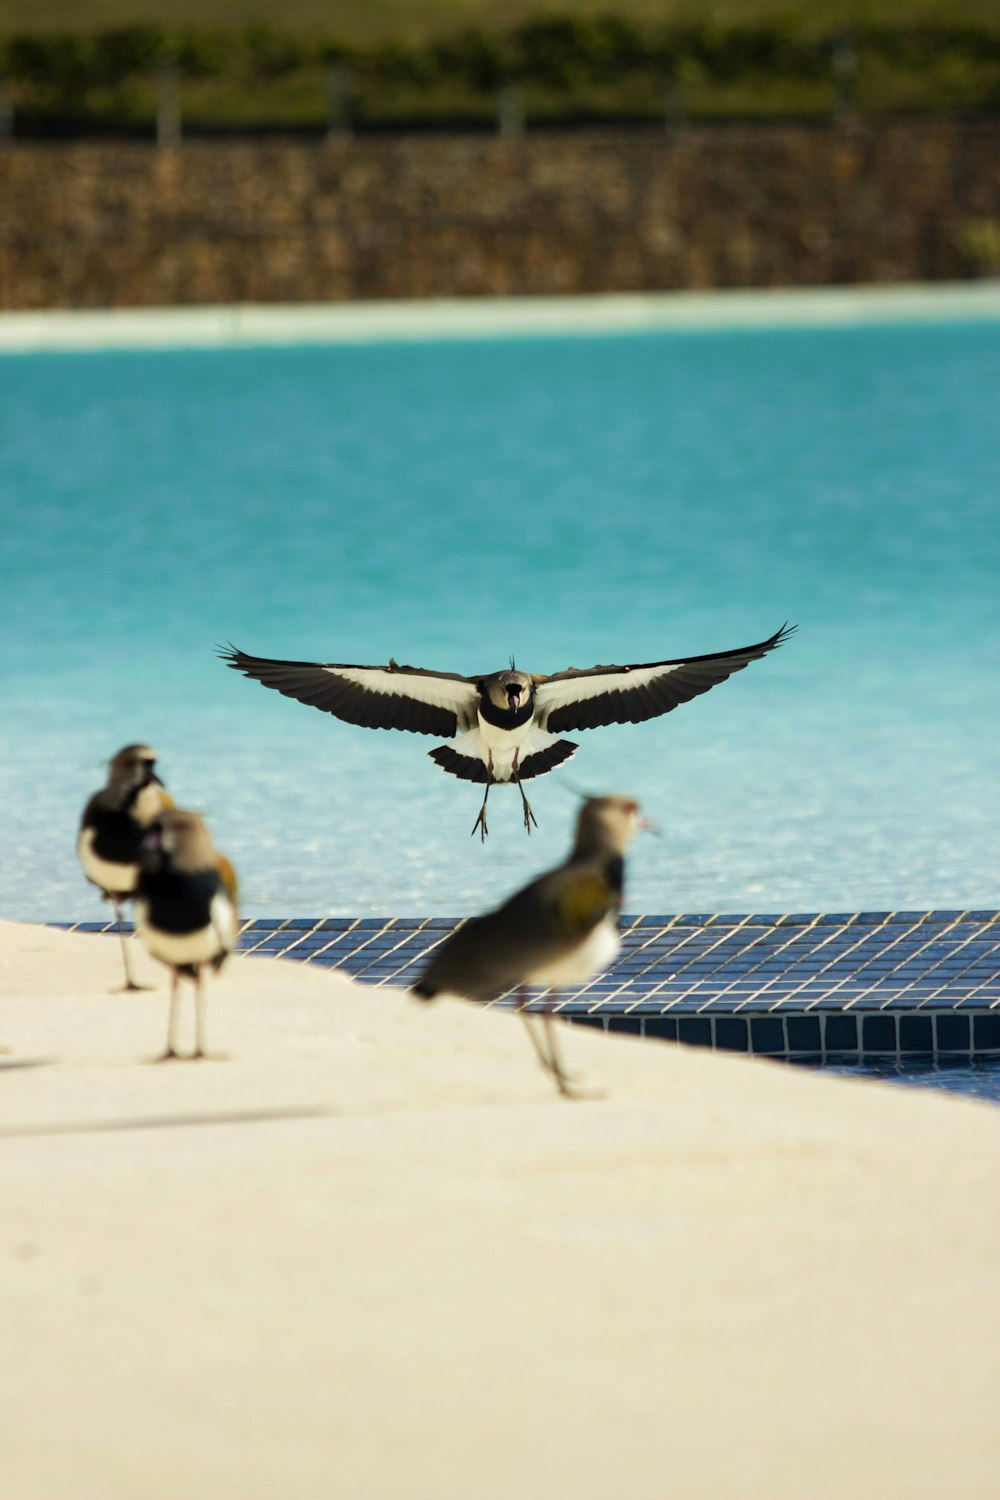 a bird landing on the edge of a swimming pool